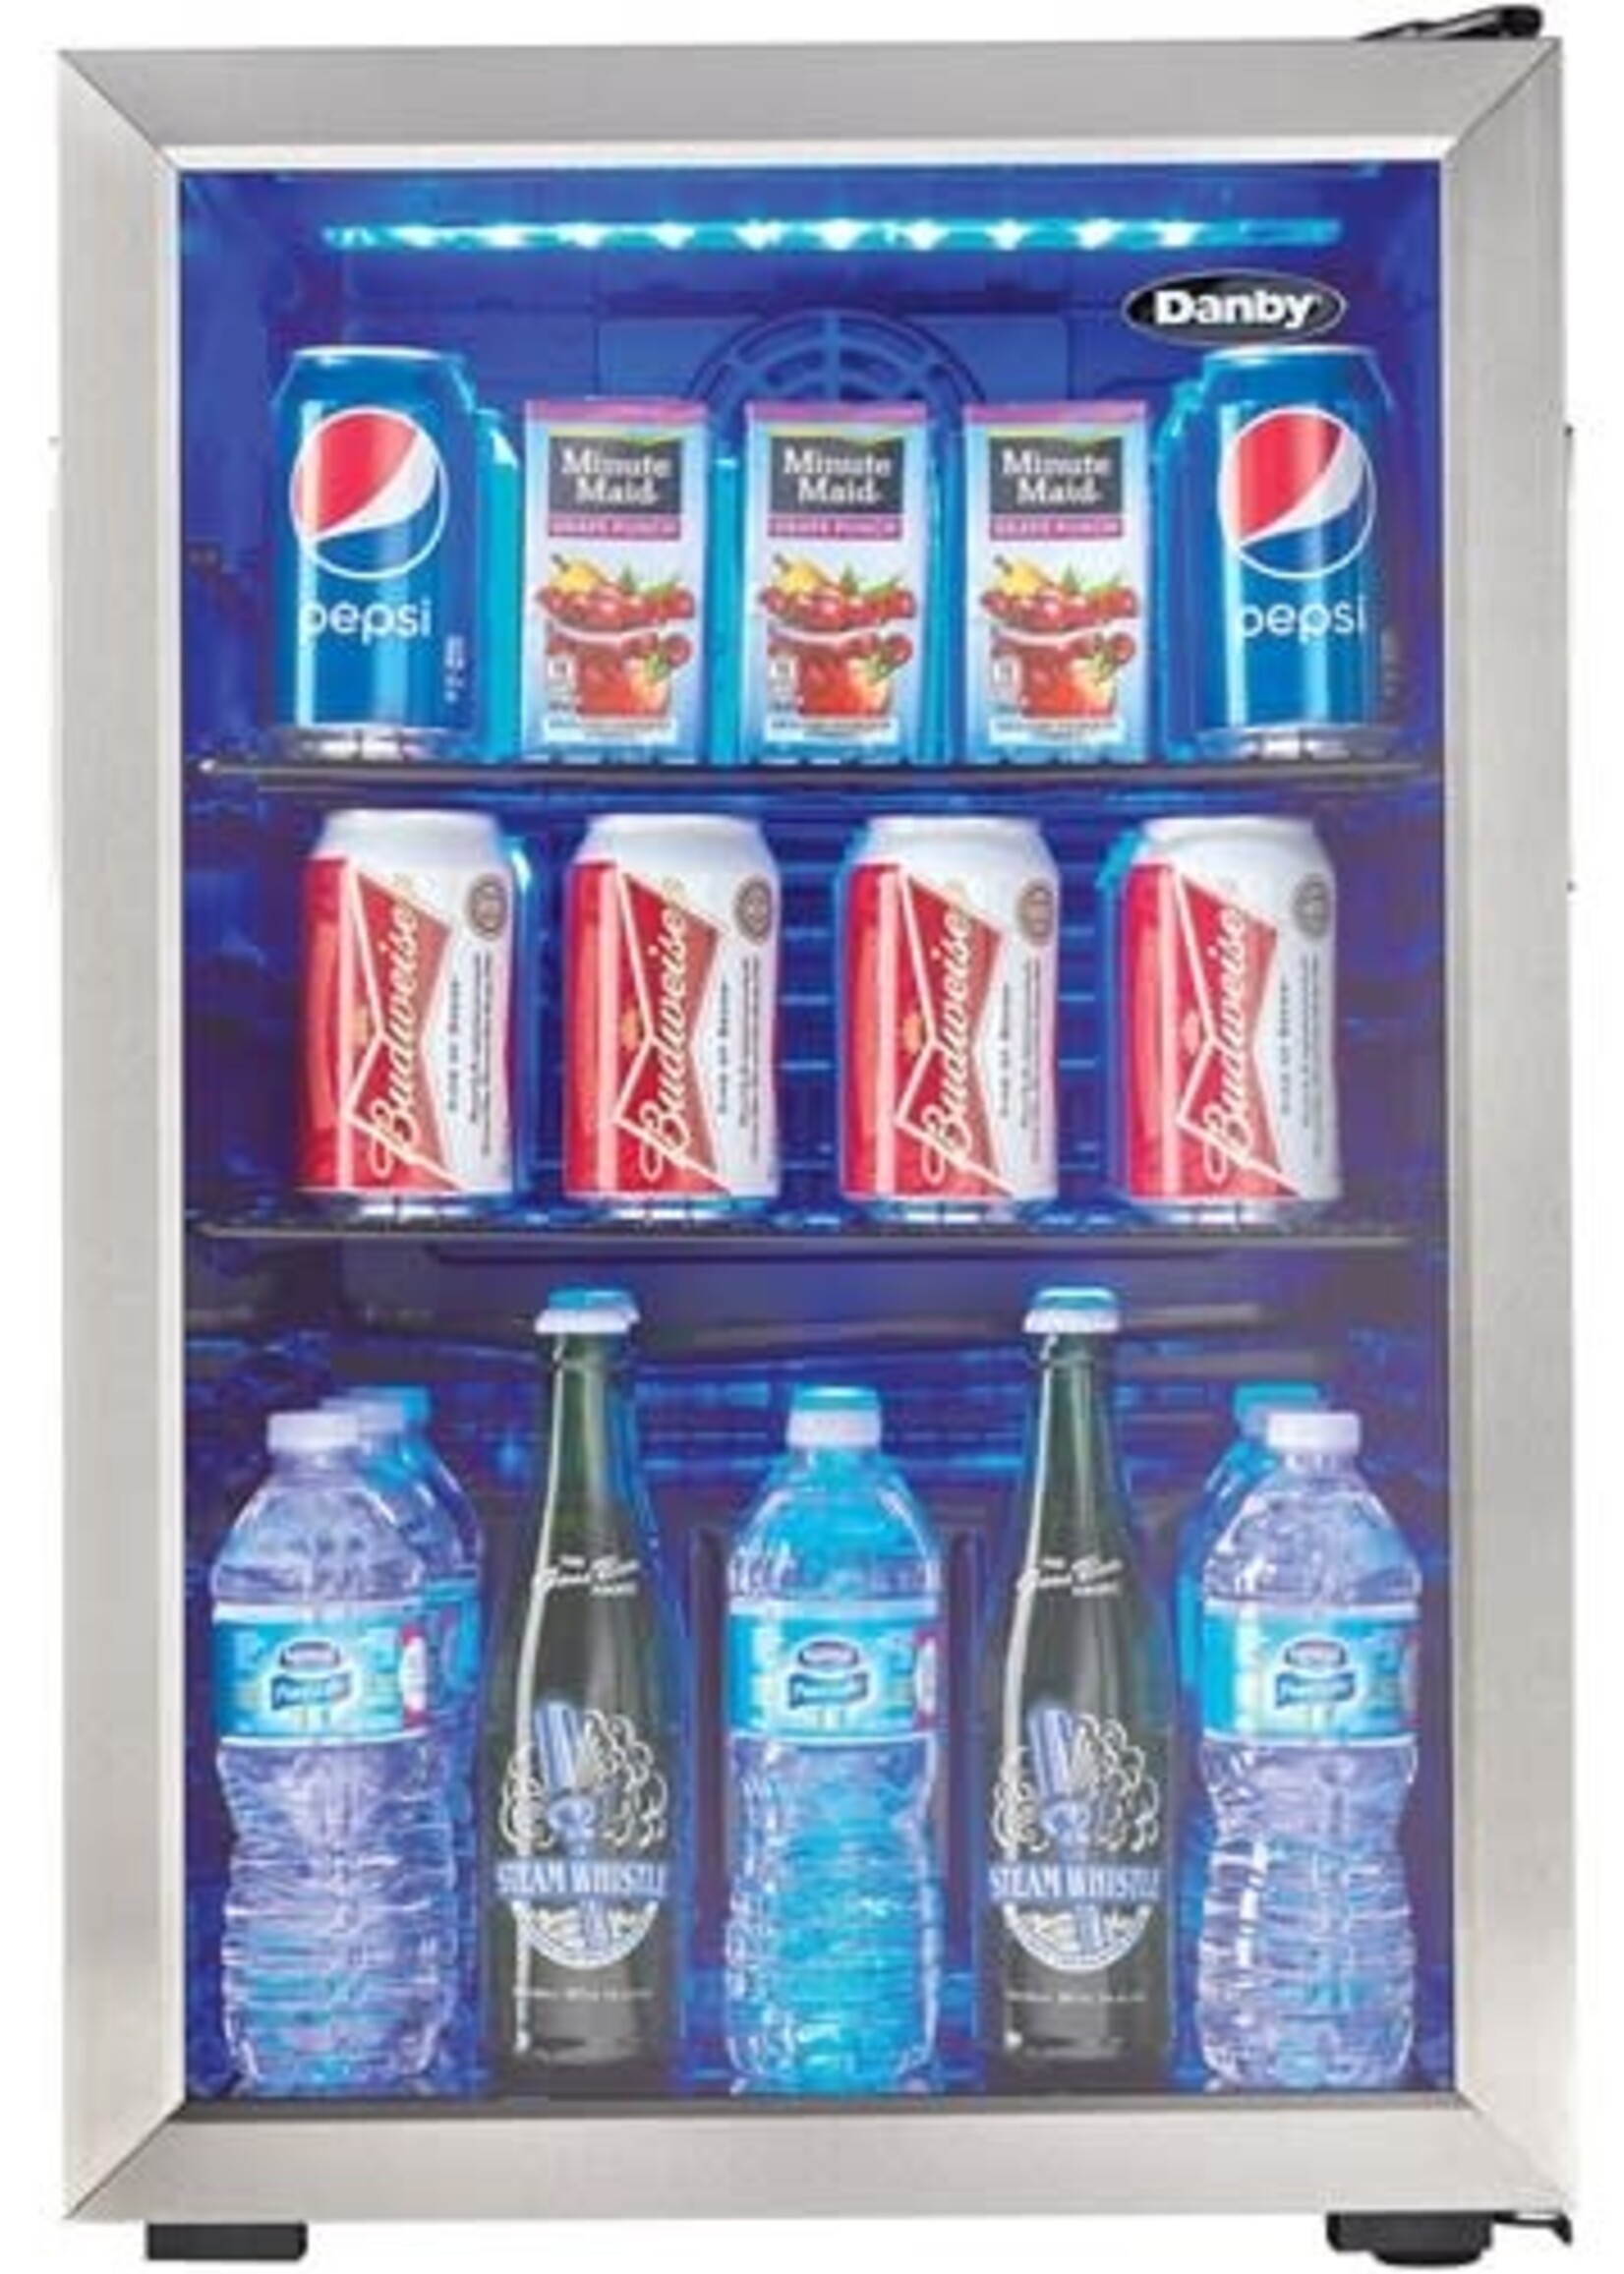 Danby **Danby  DBC026A1BSSDB  2.6 CuFt. Beverage Center, Tempered Glass Door, Free Standing Application - Black/Stainless